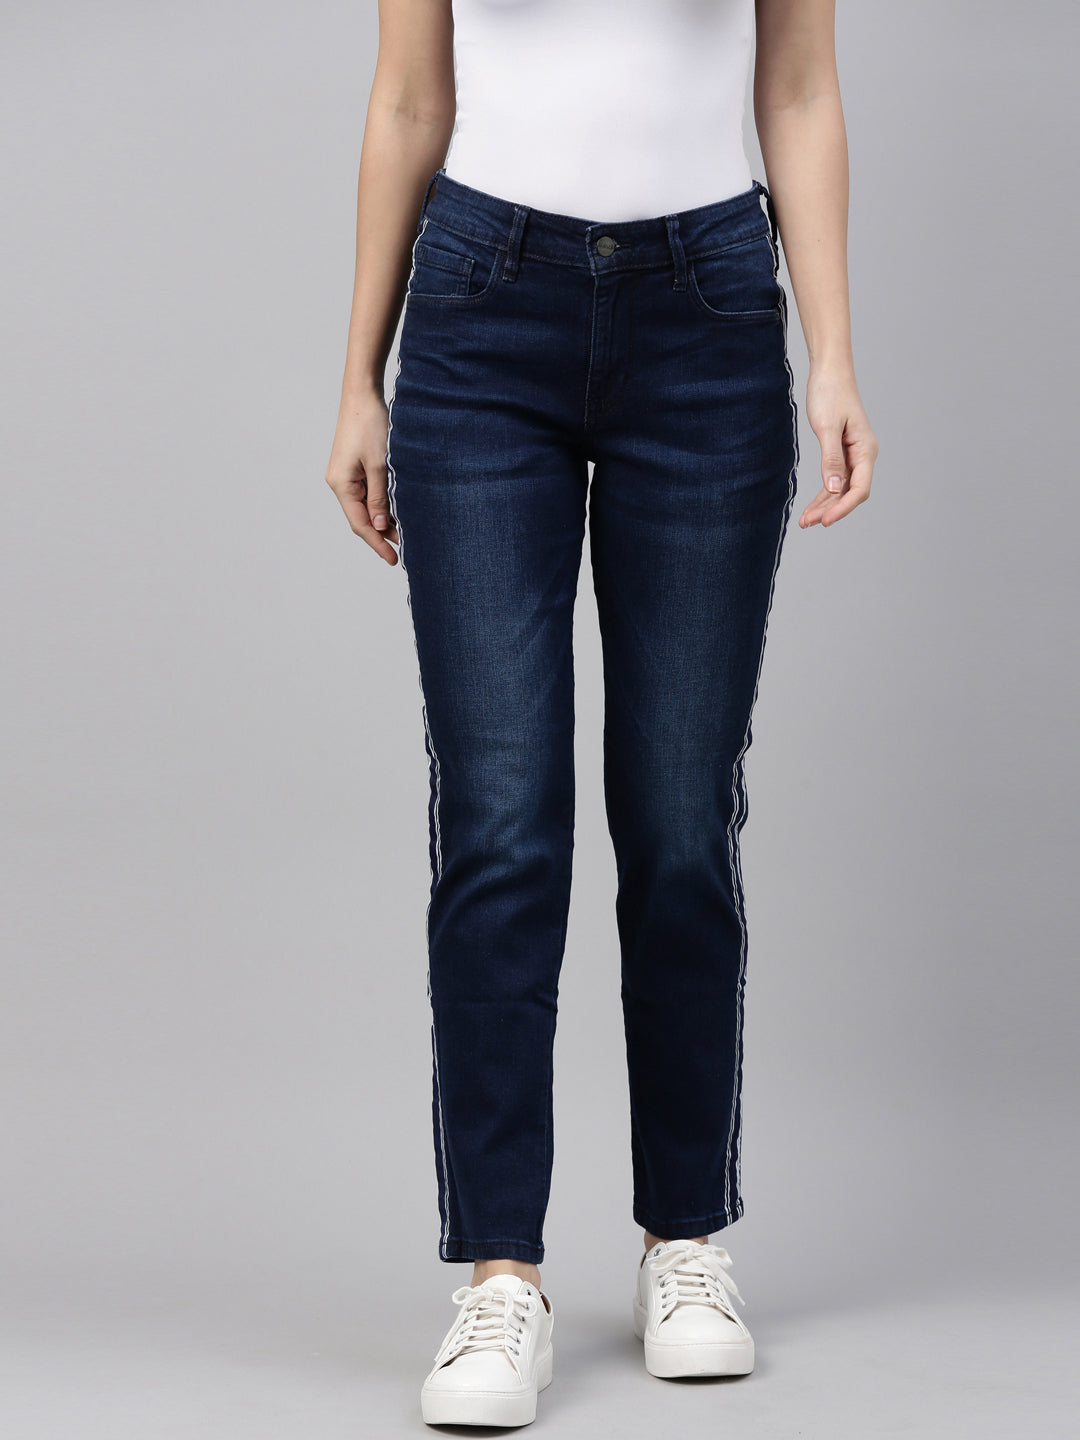 Women Solid Blue Straight Jeans- Go Colors